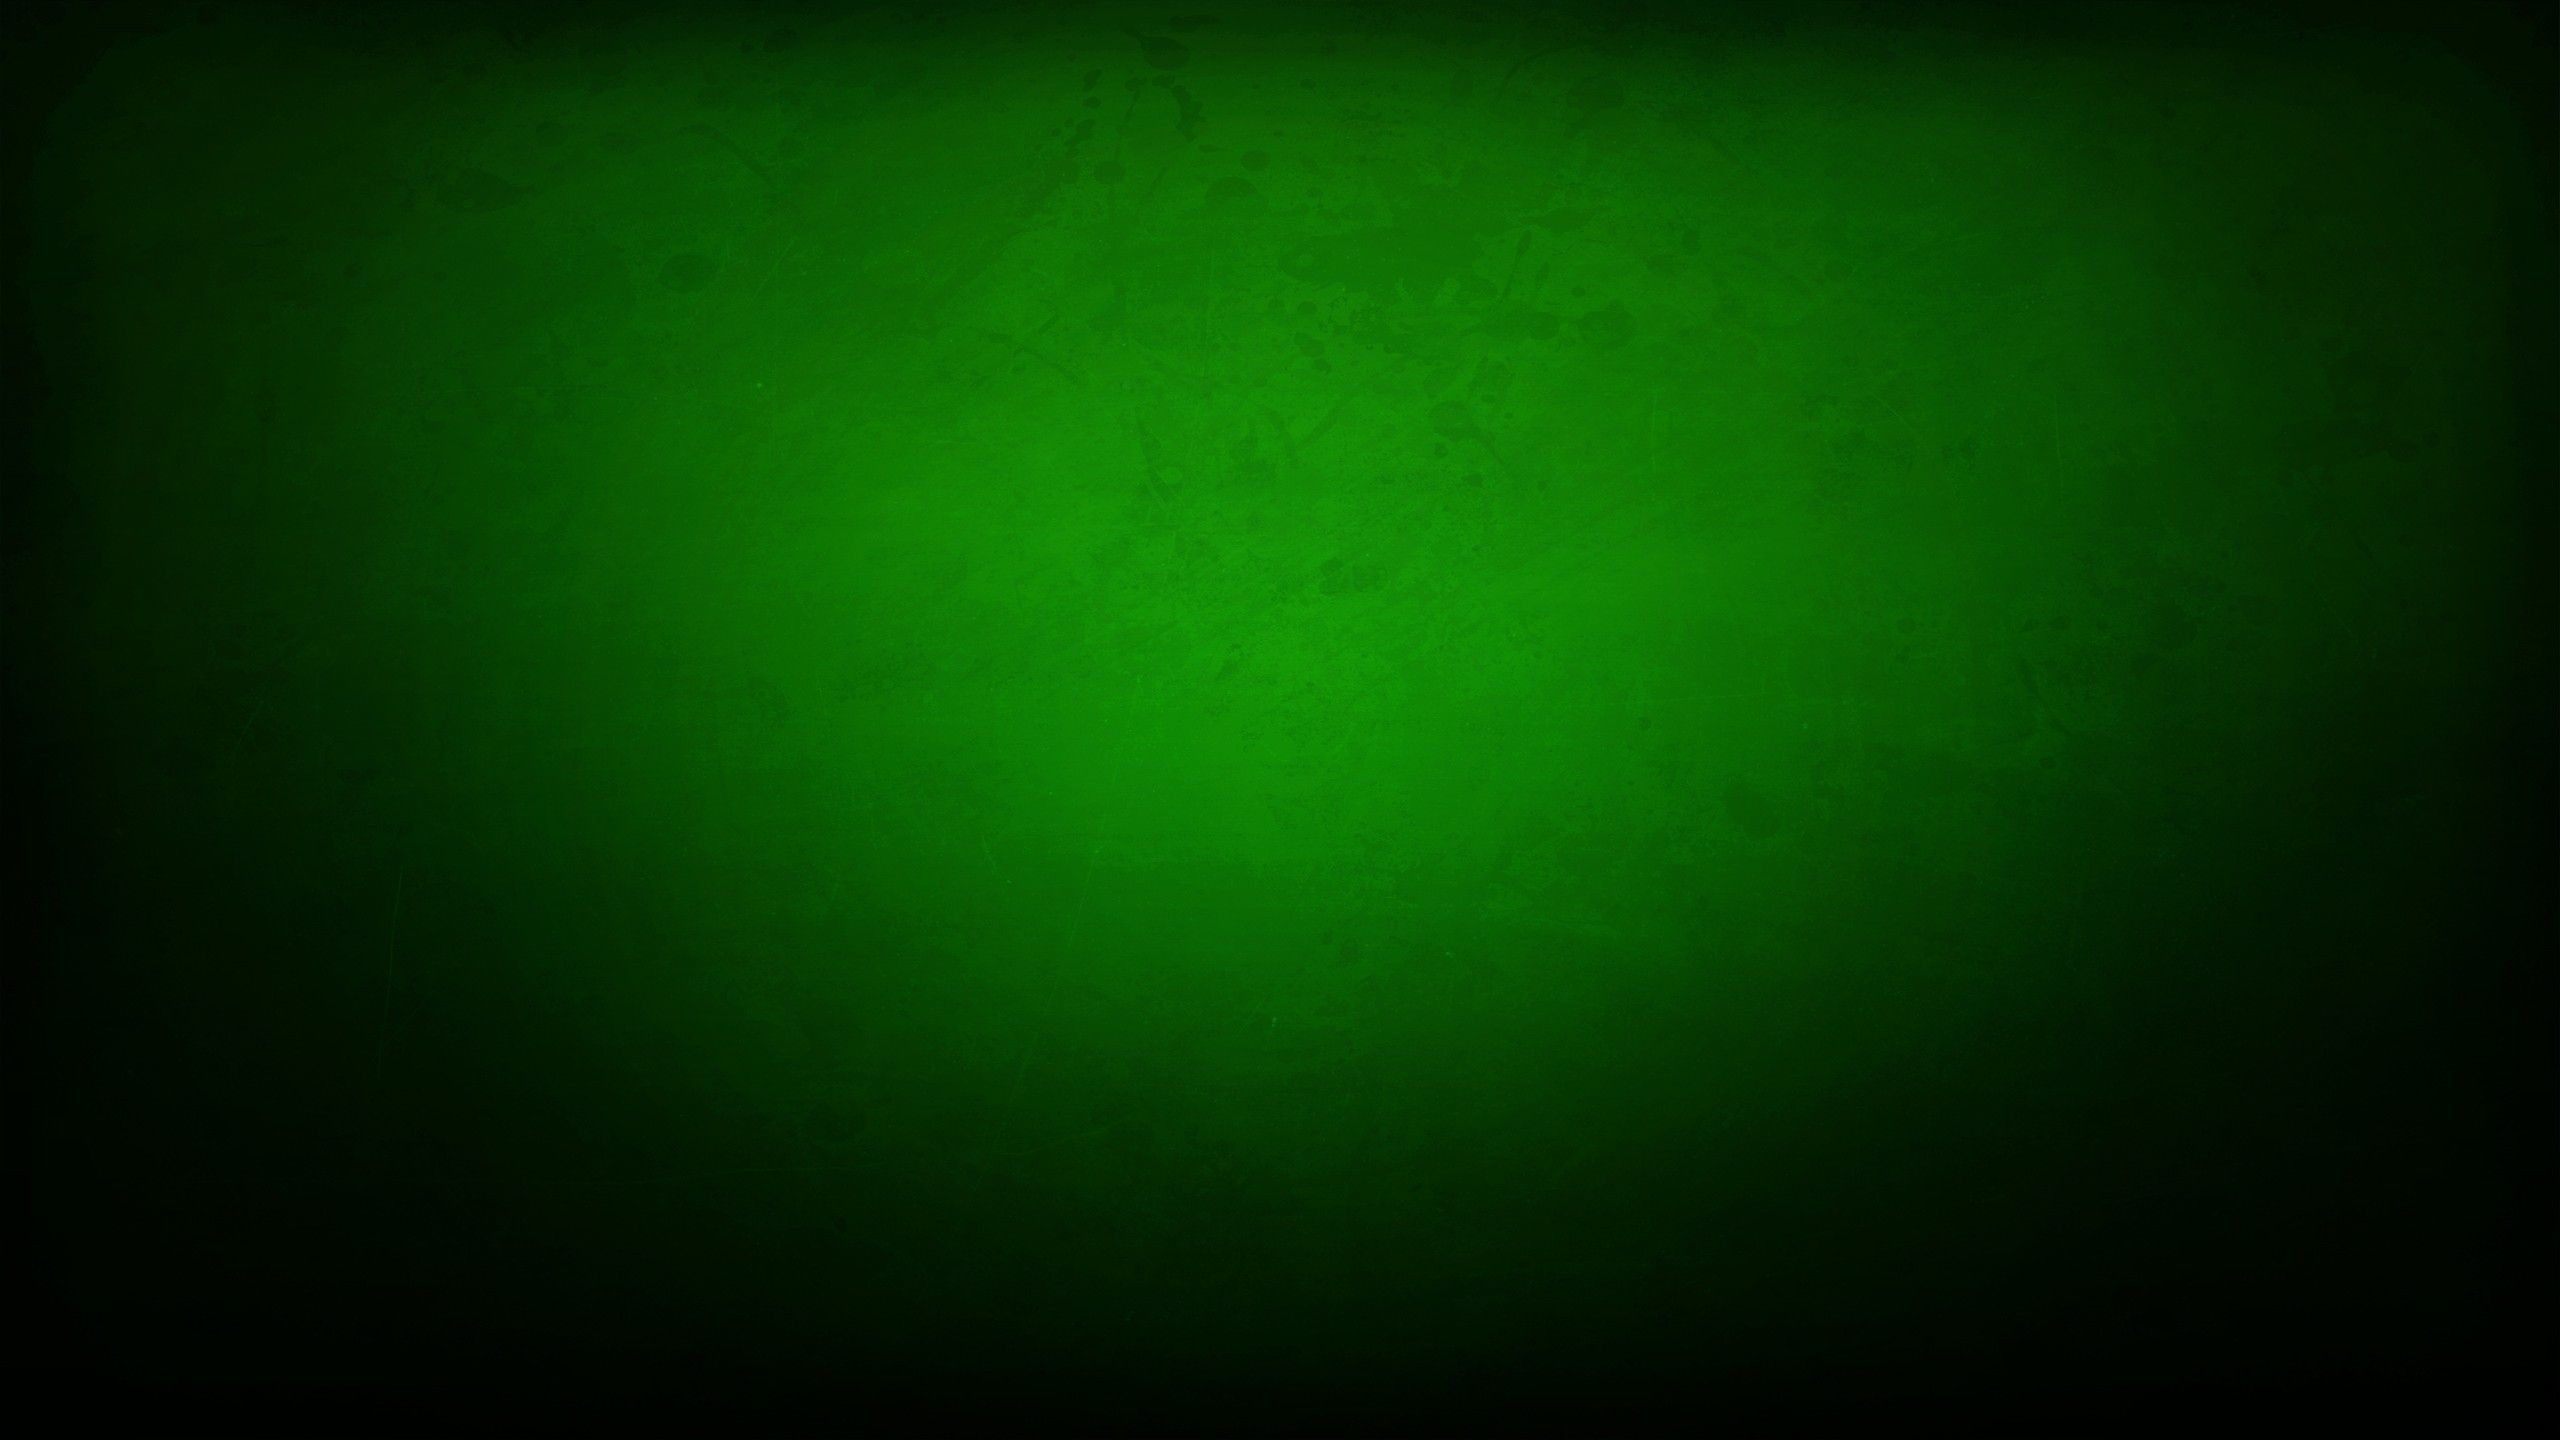 Solid Green Wallpaper 67 Images